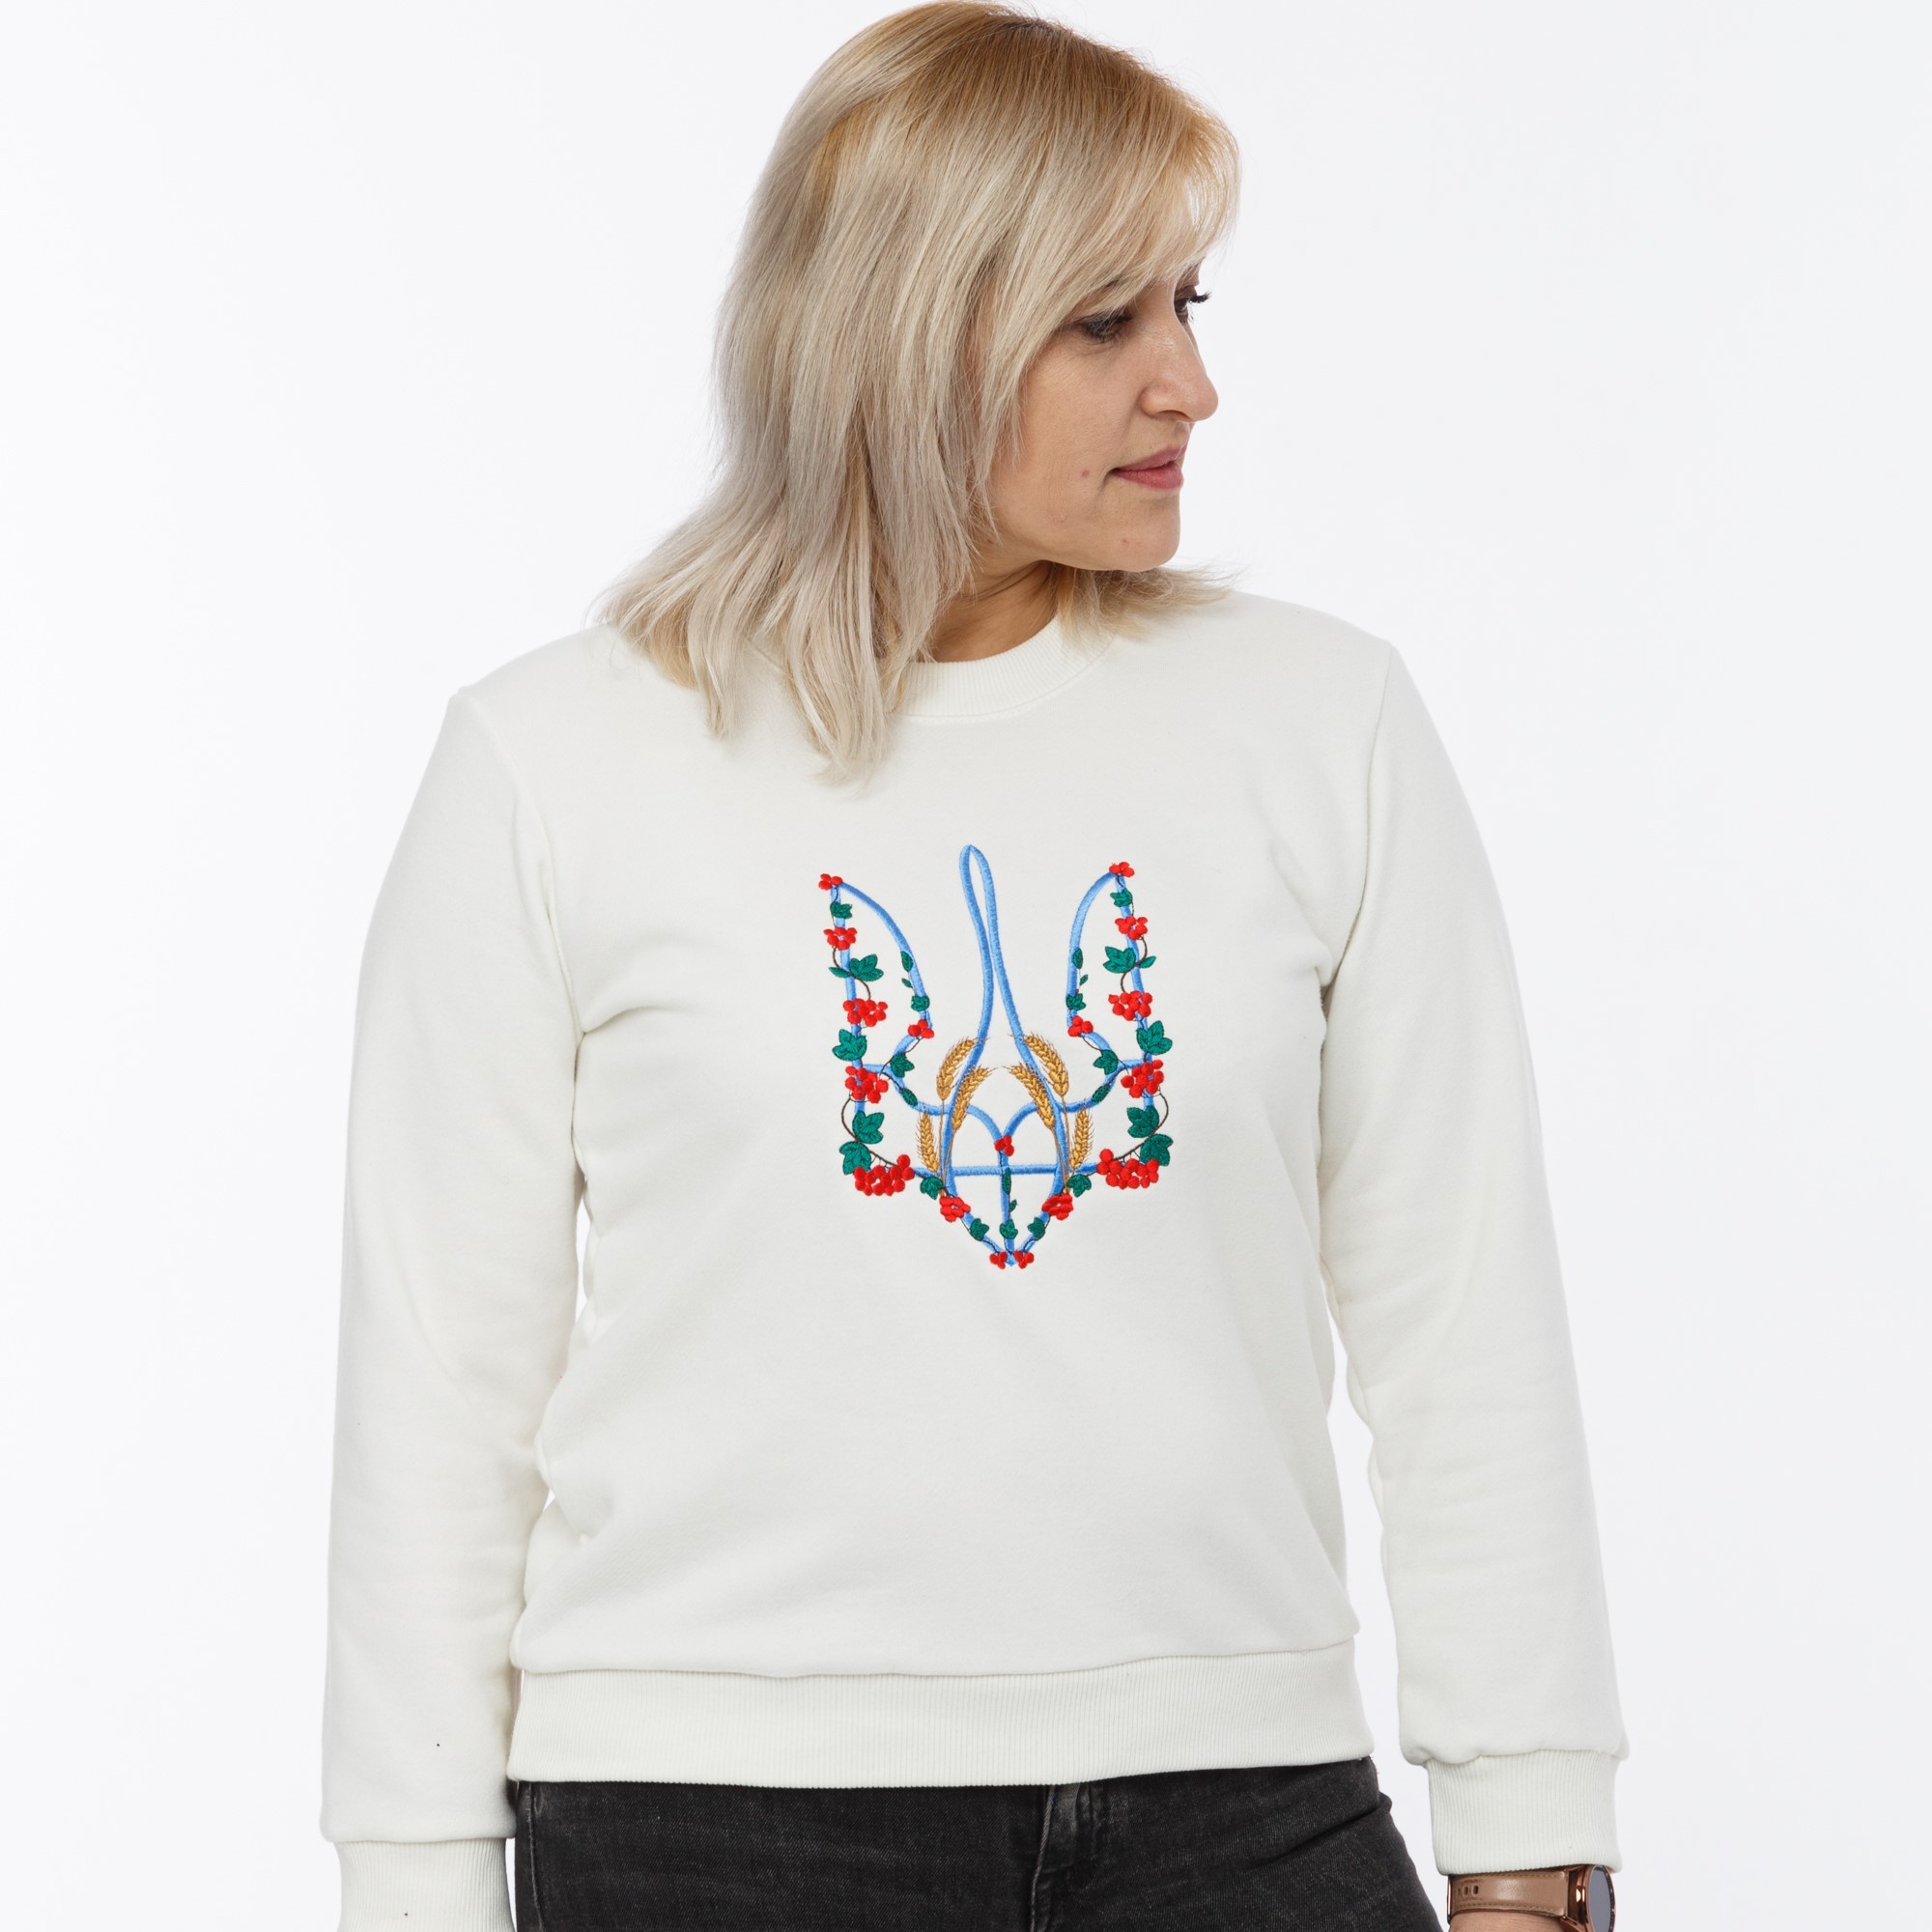 Women's sweatshirt with  "Red kalyna trident" embroidery ivory